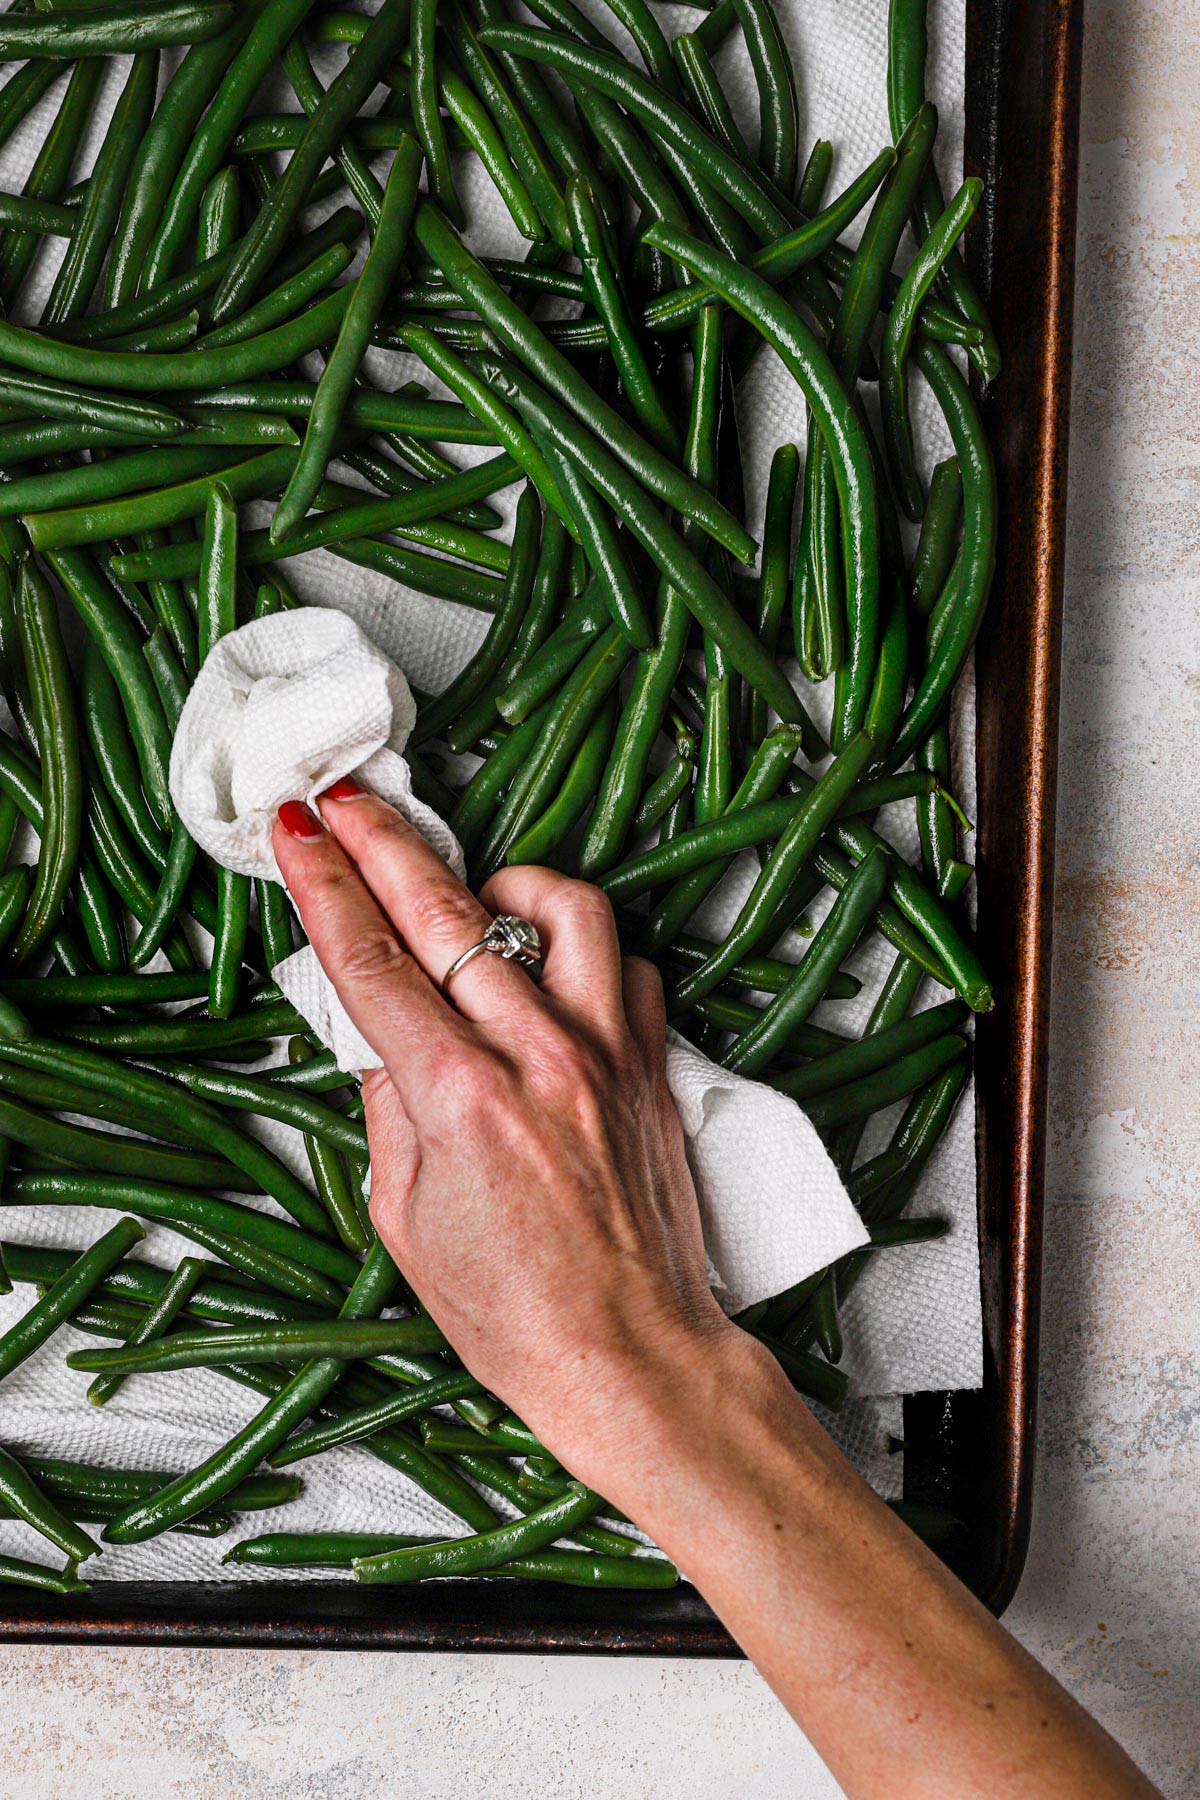 Green beans draining on paper towel-lined pan.